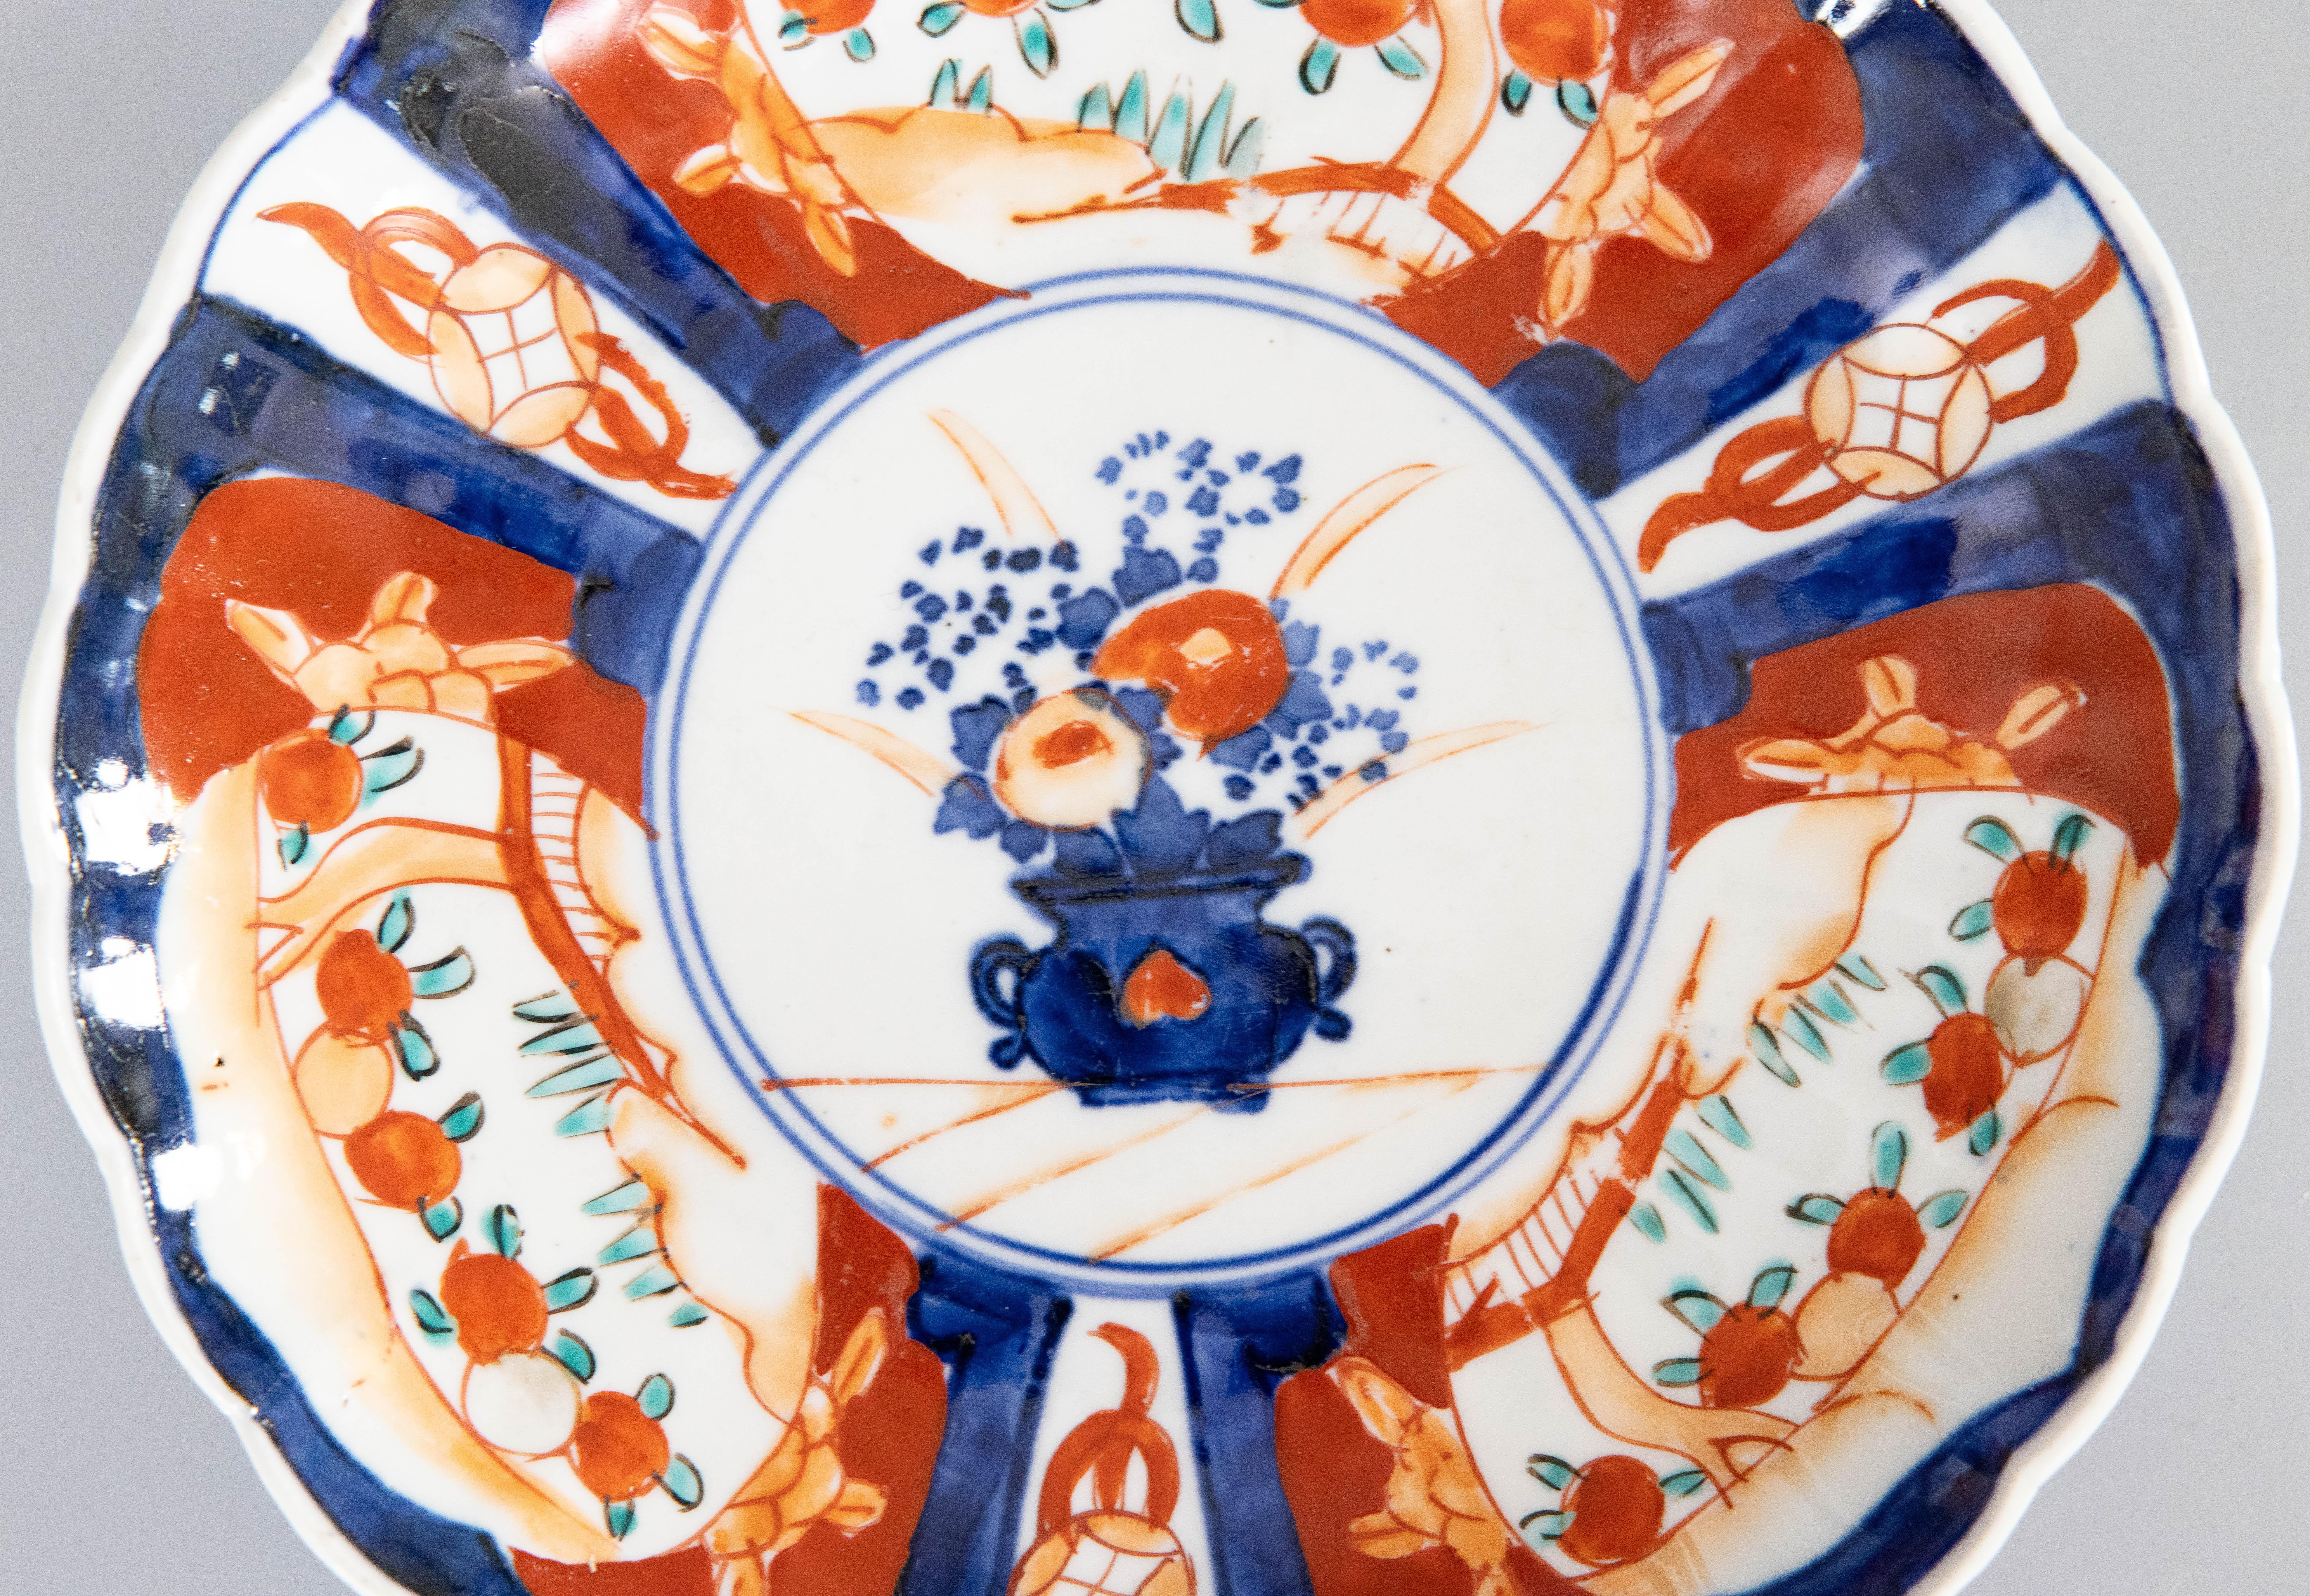 Wonderful 19th century antique Imari plate with scalloped edge. Featuring vibrant oranges, blues, and green. The center of the plate depicts a hand-painted vase with a spray of flowers. 